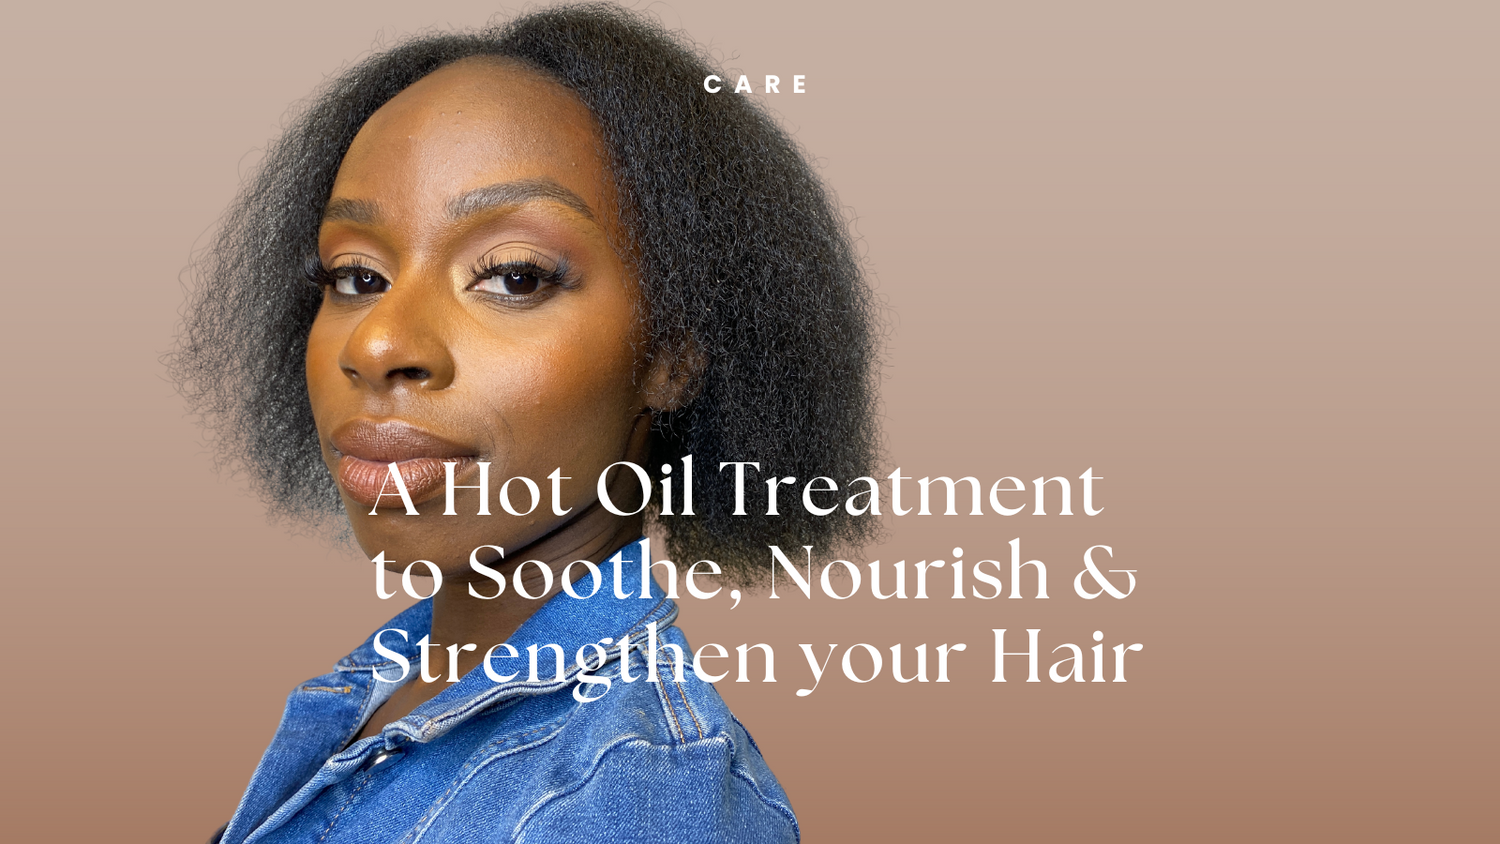 A hot oil treatment to soothe, nourish & strengthen your hair - Organic SUKU